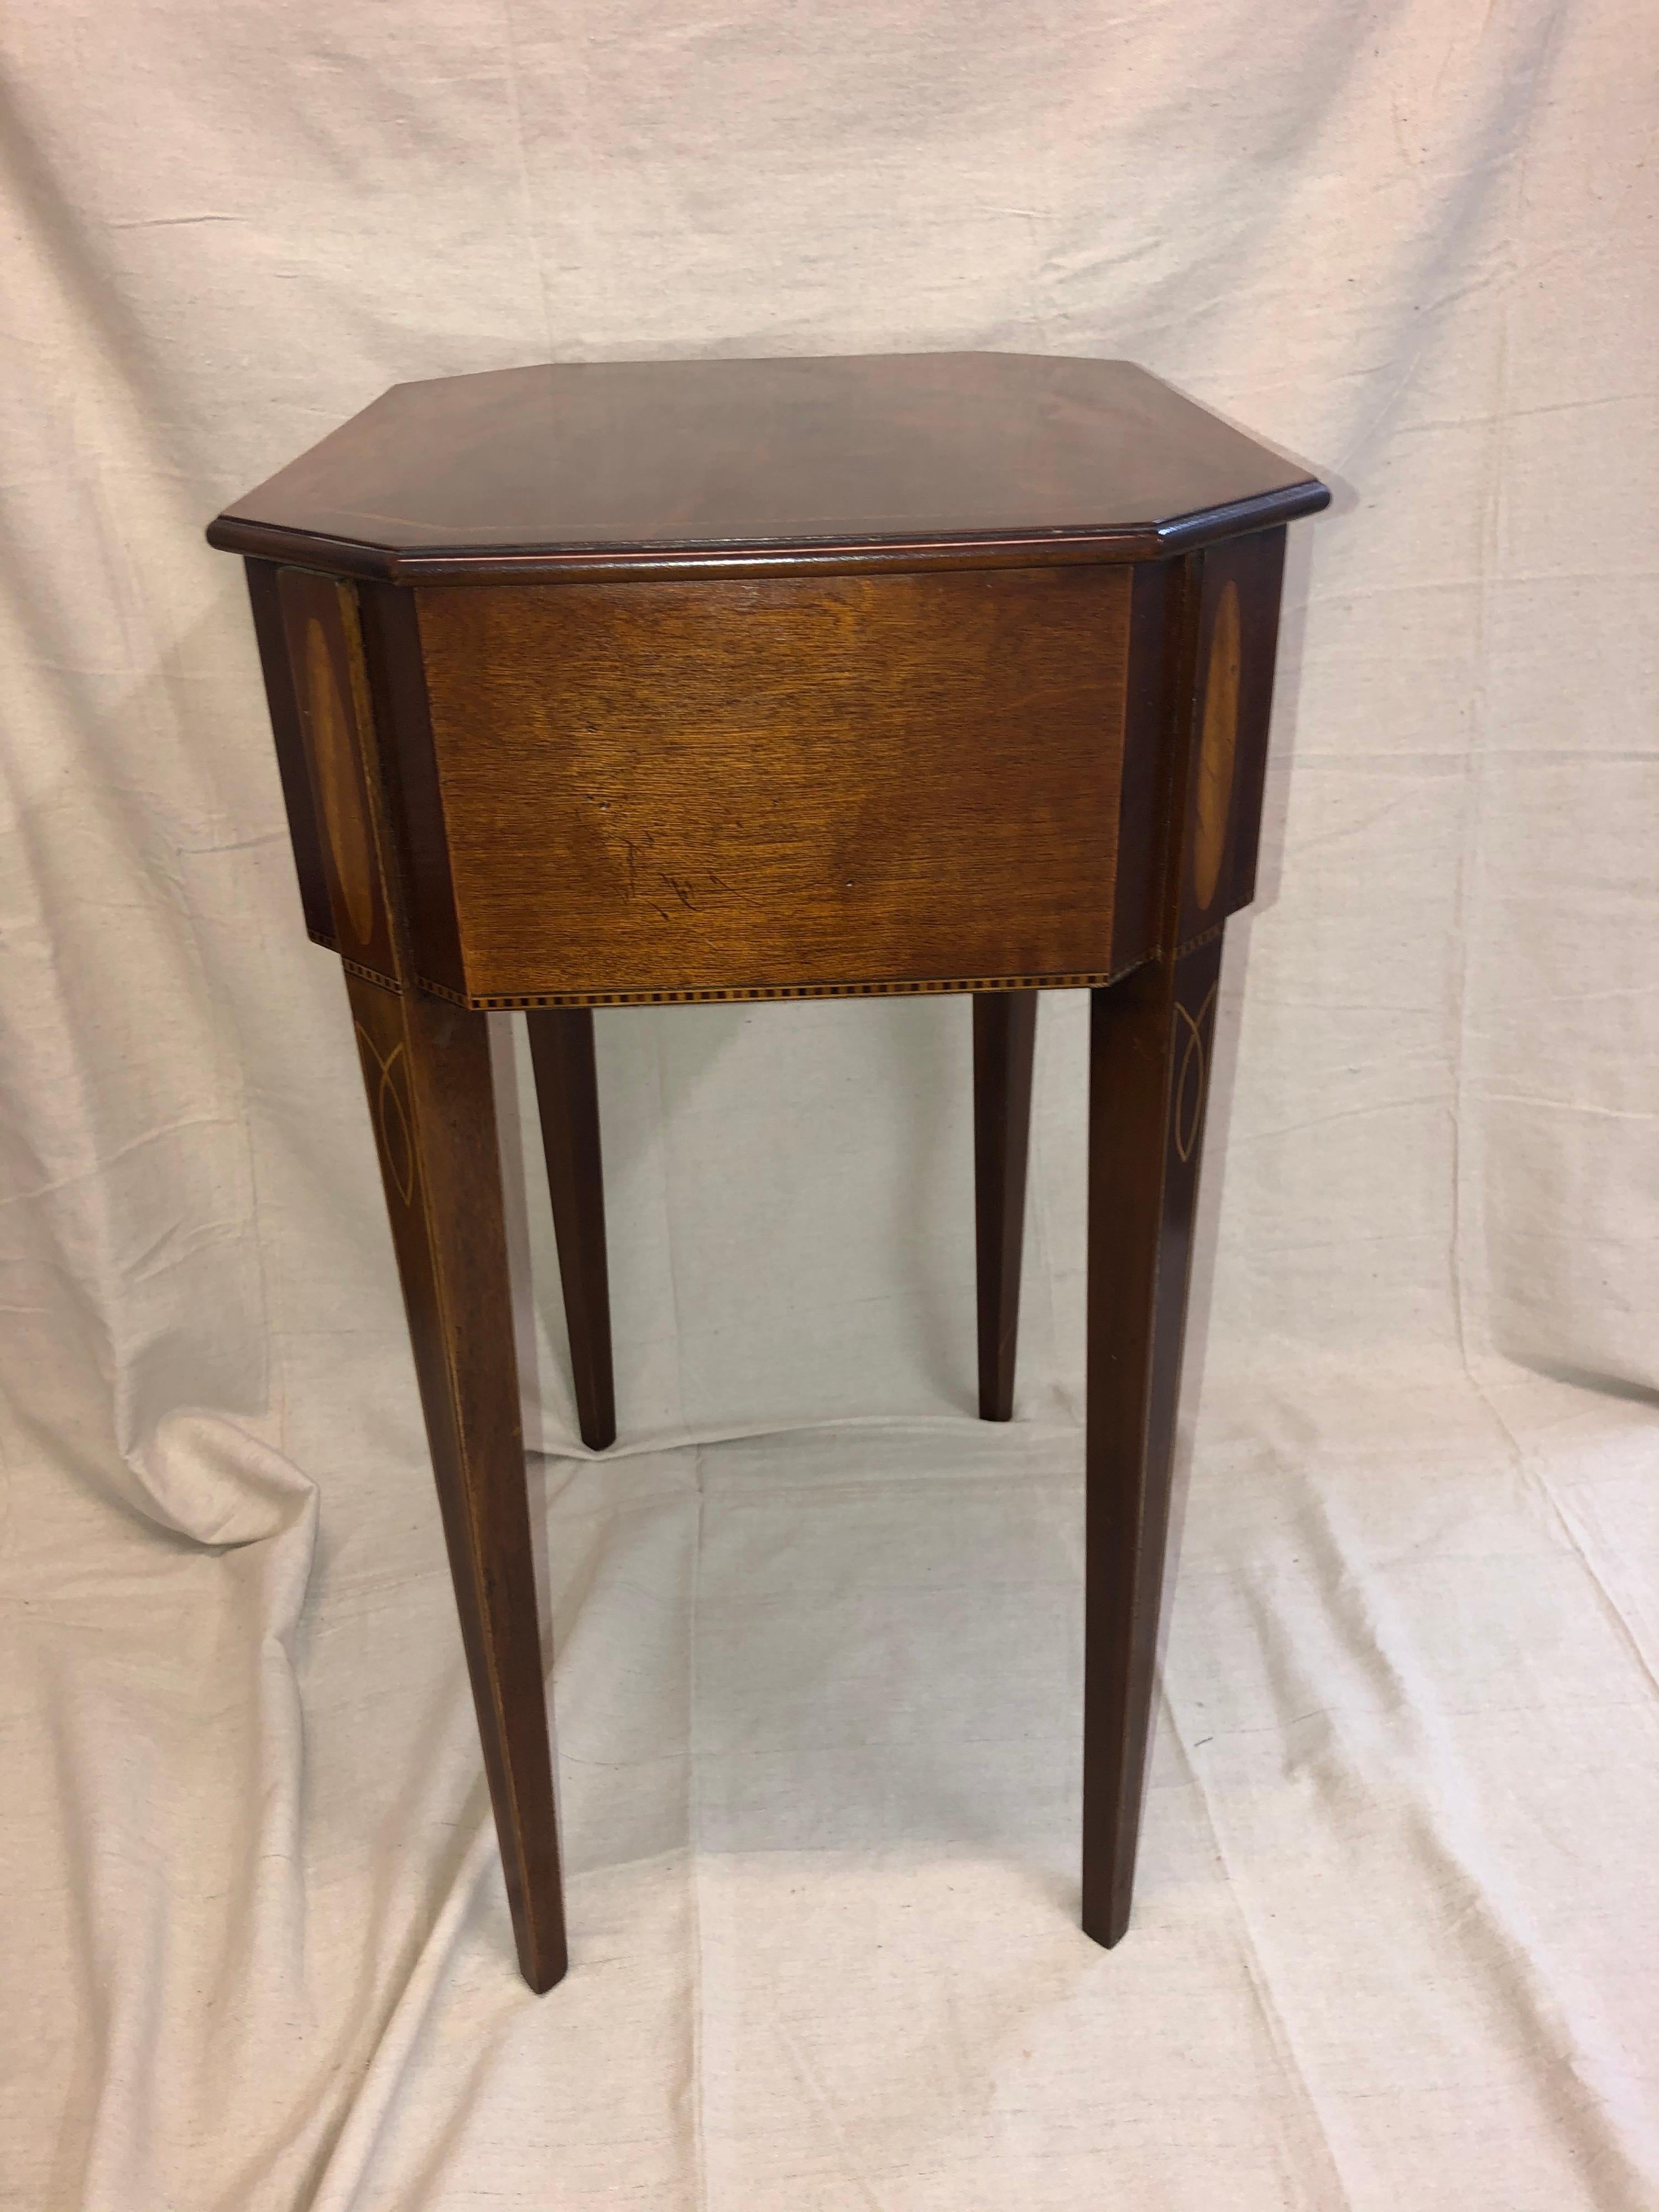 Satinwood Antique Inlaid Sheraton End Table/Nightstand